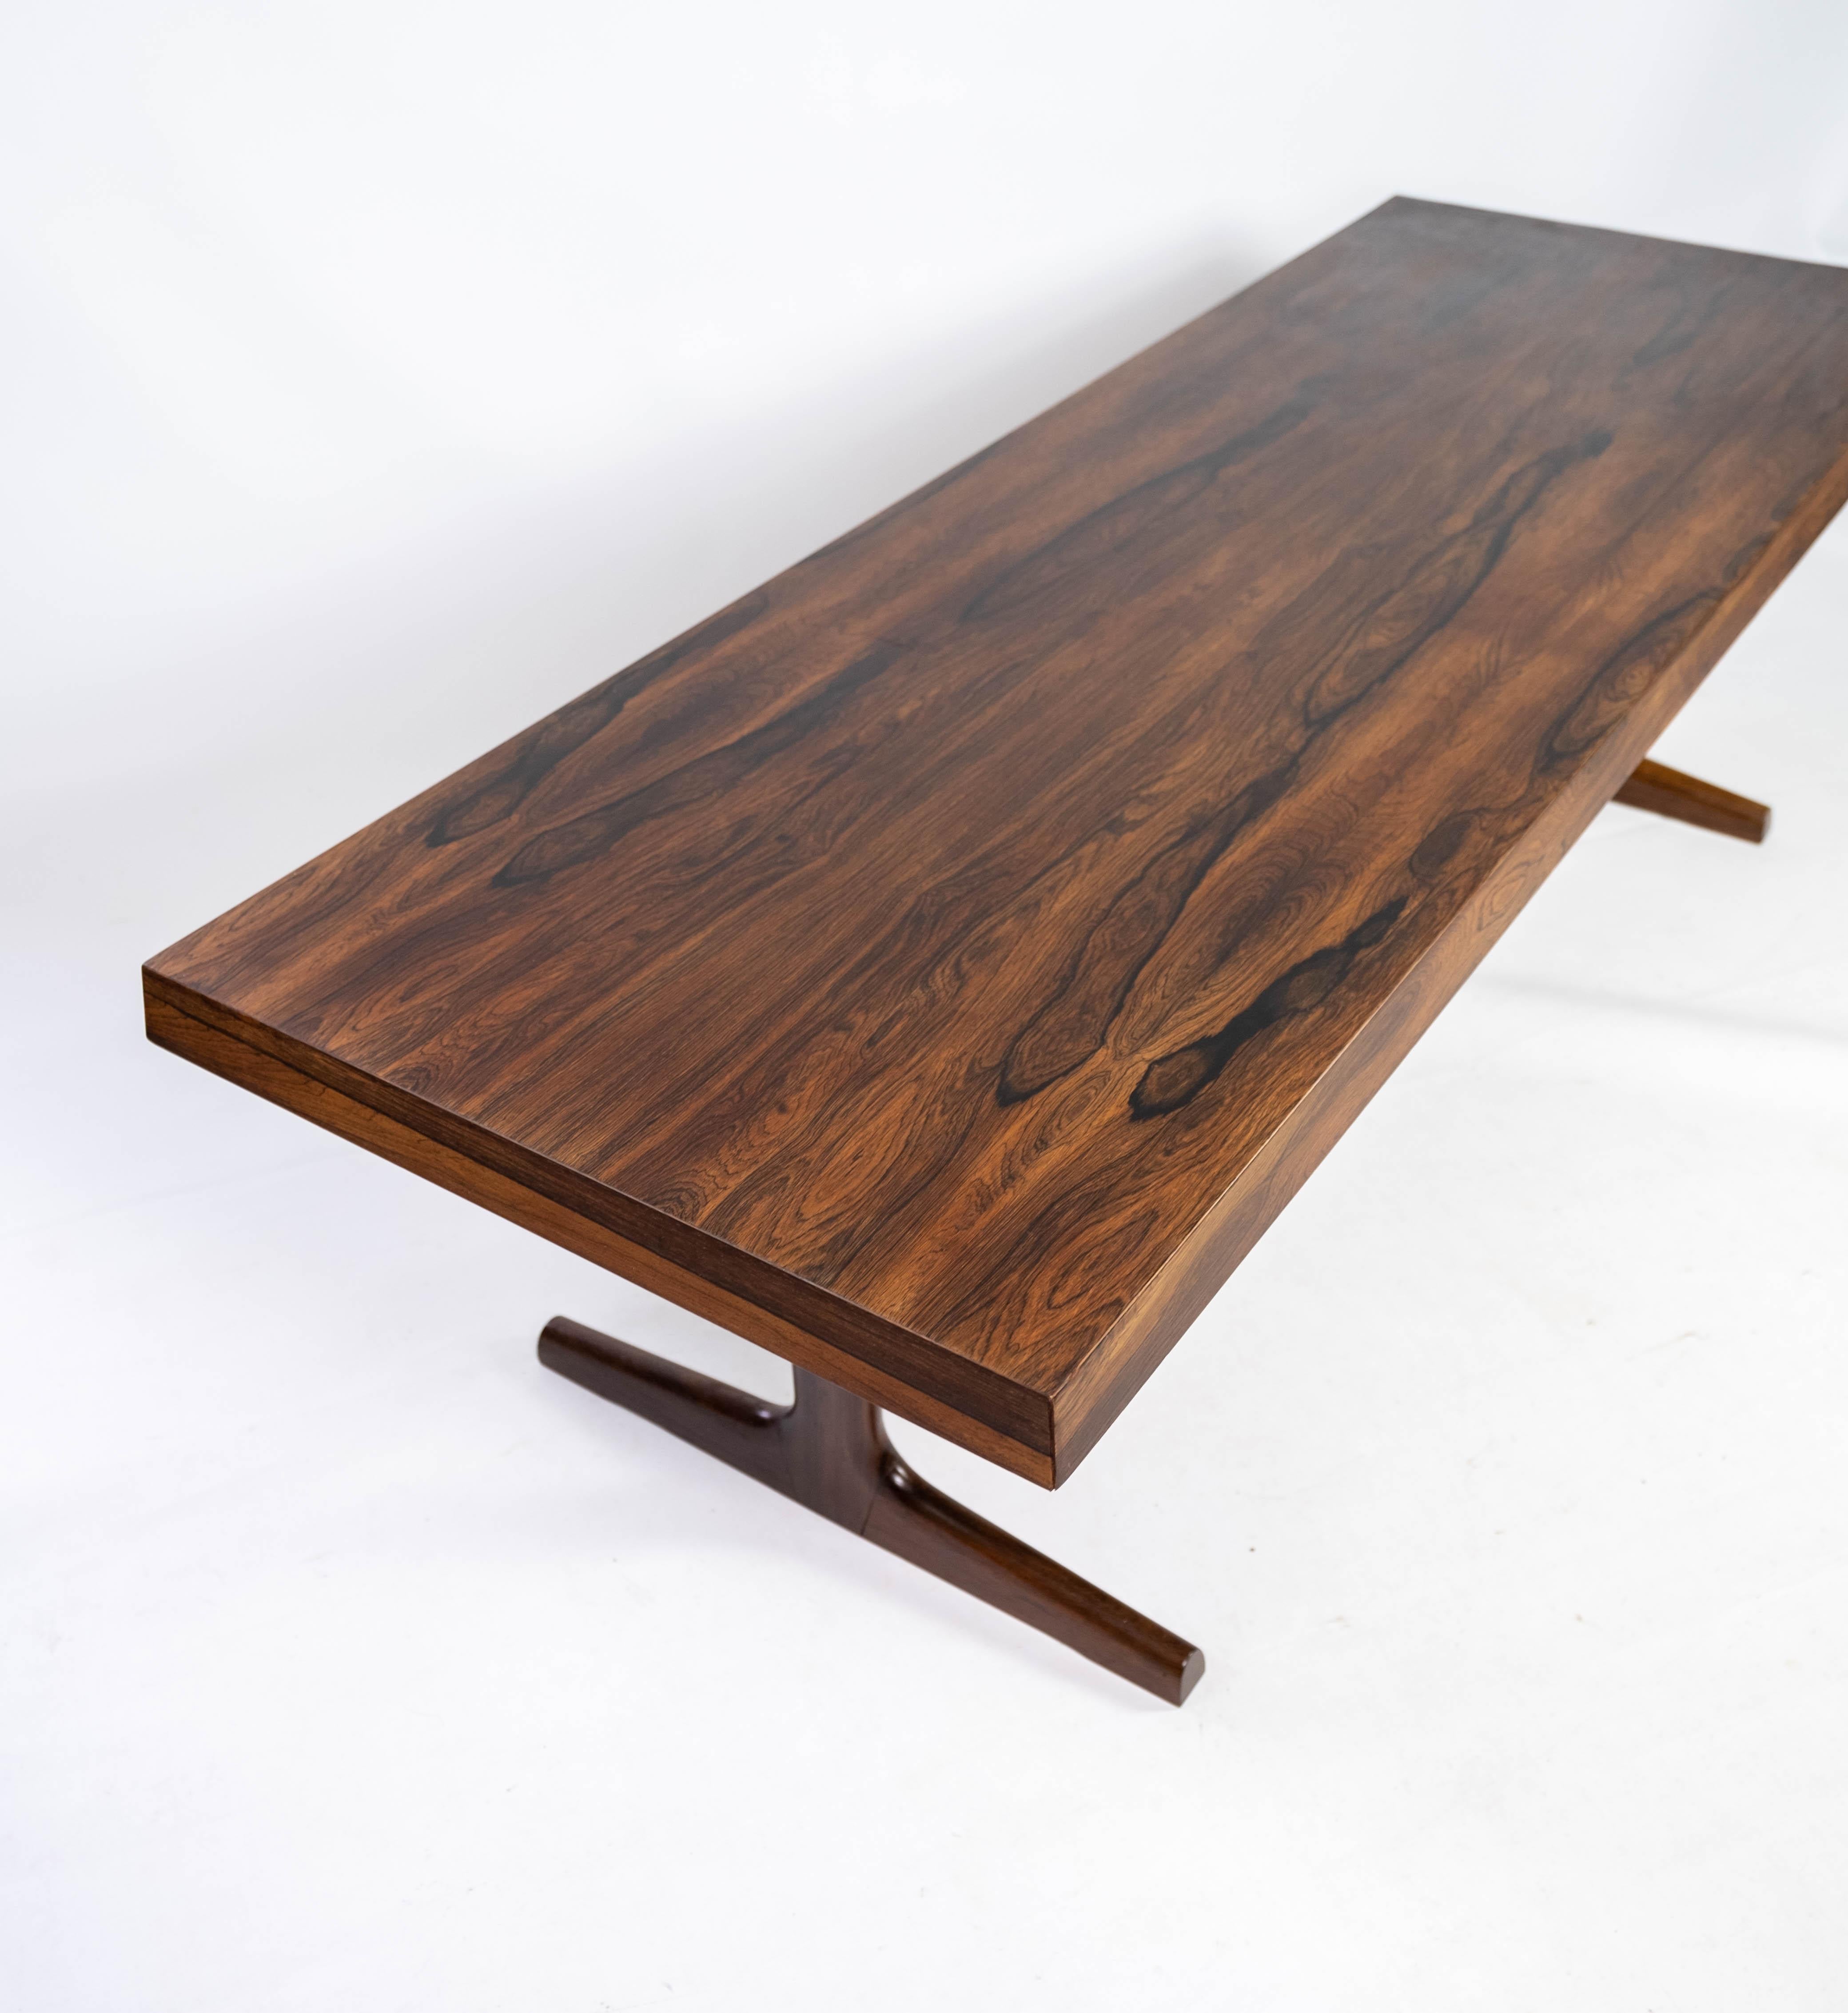 Coffee Table Made In Rosewood With Shaker Legs, Danish Design From 1960s For Sale 2